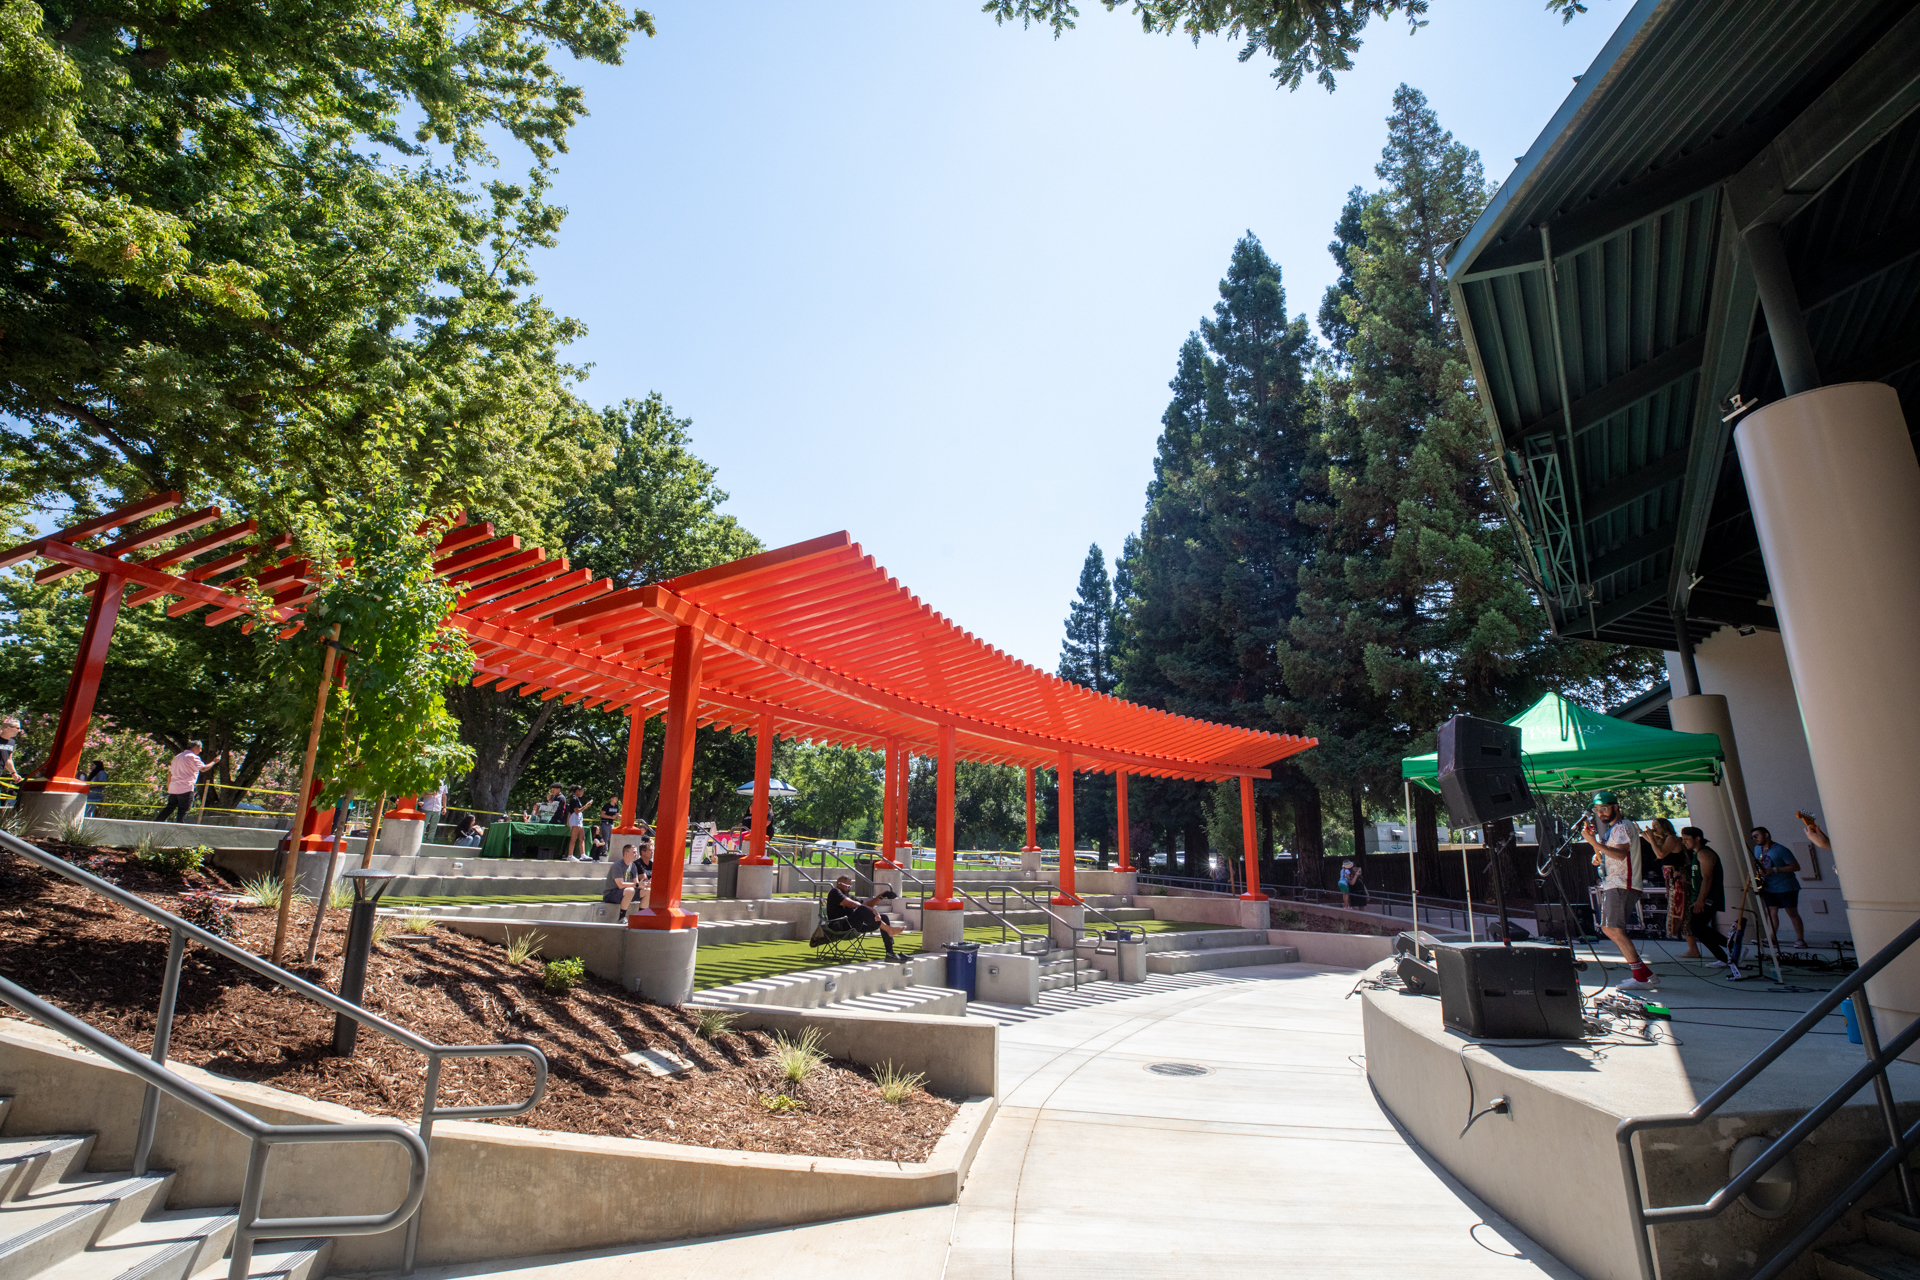 A newly renovated stage in Serna Plaza features tiered seating and shade for events.